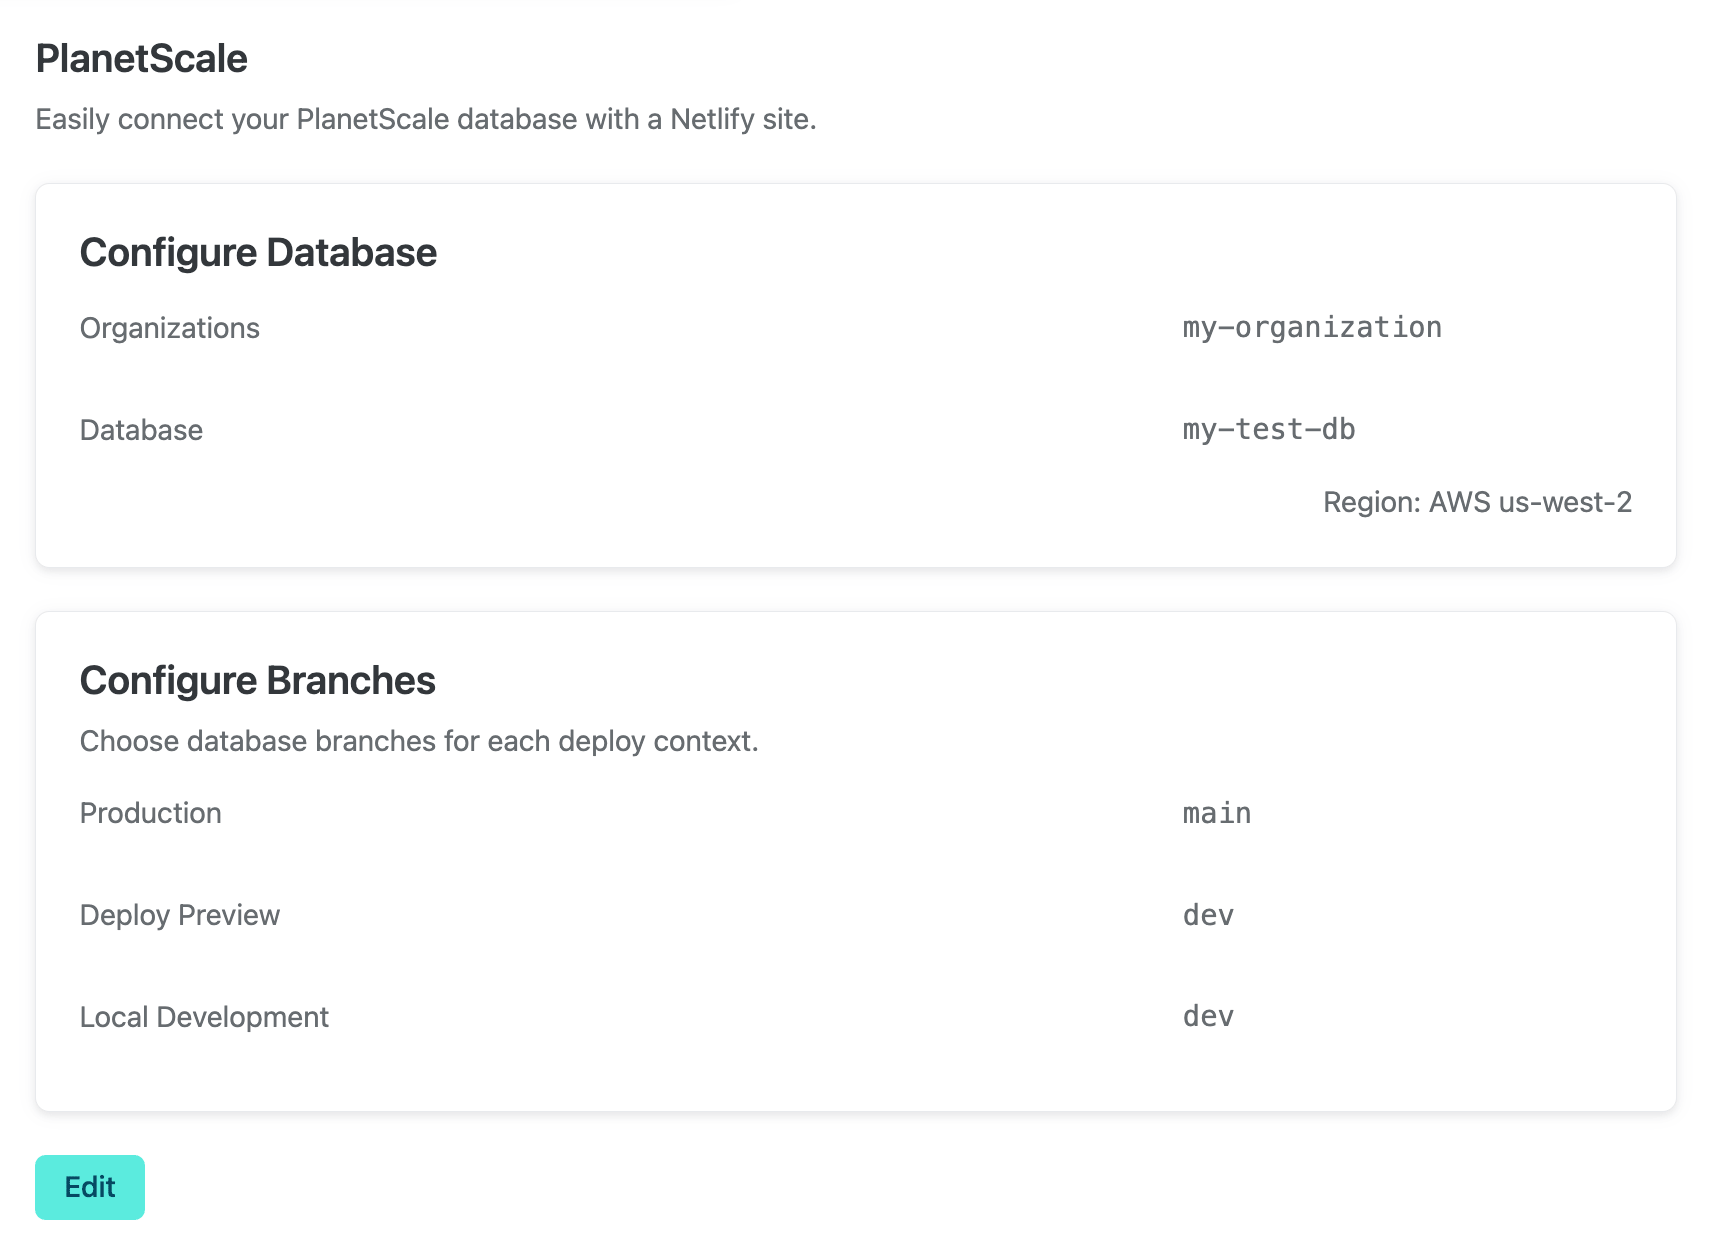 The PlanetScale page in the Netlify UI includes a configured database branch for the production, Deploy Preview, and local development deploy contexts.